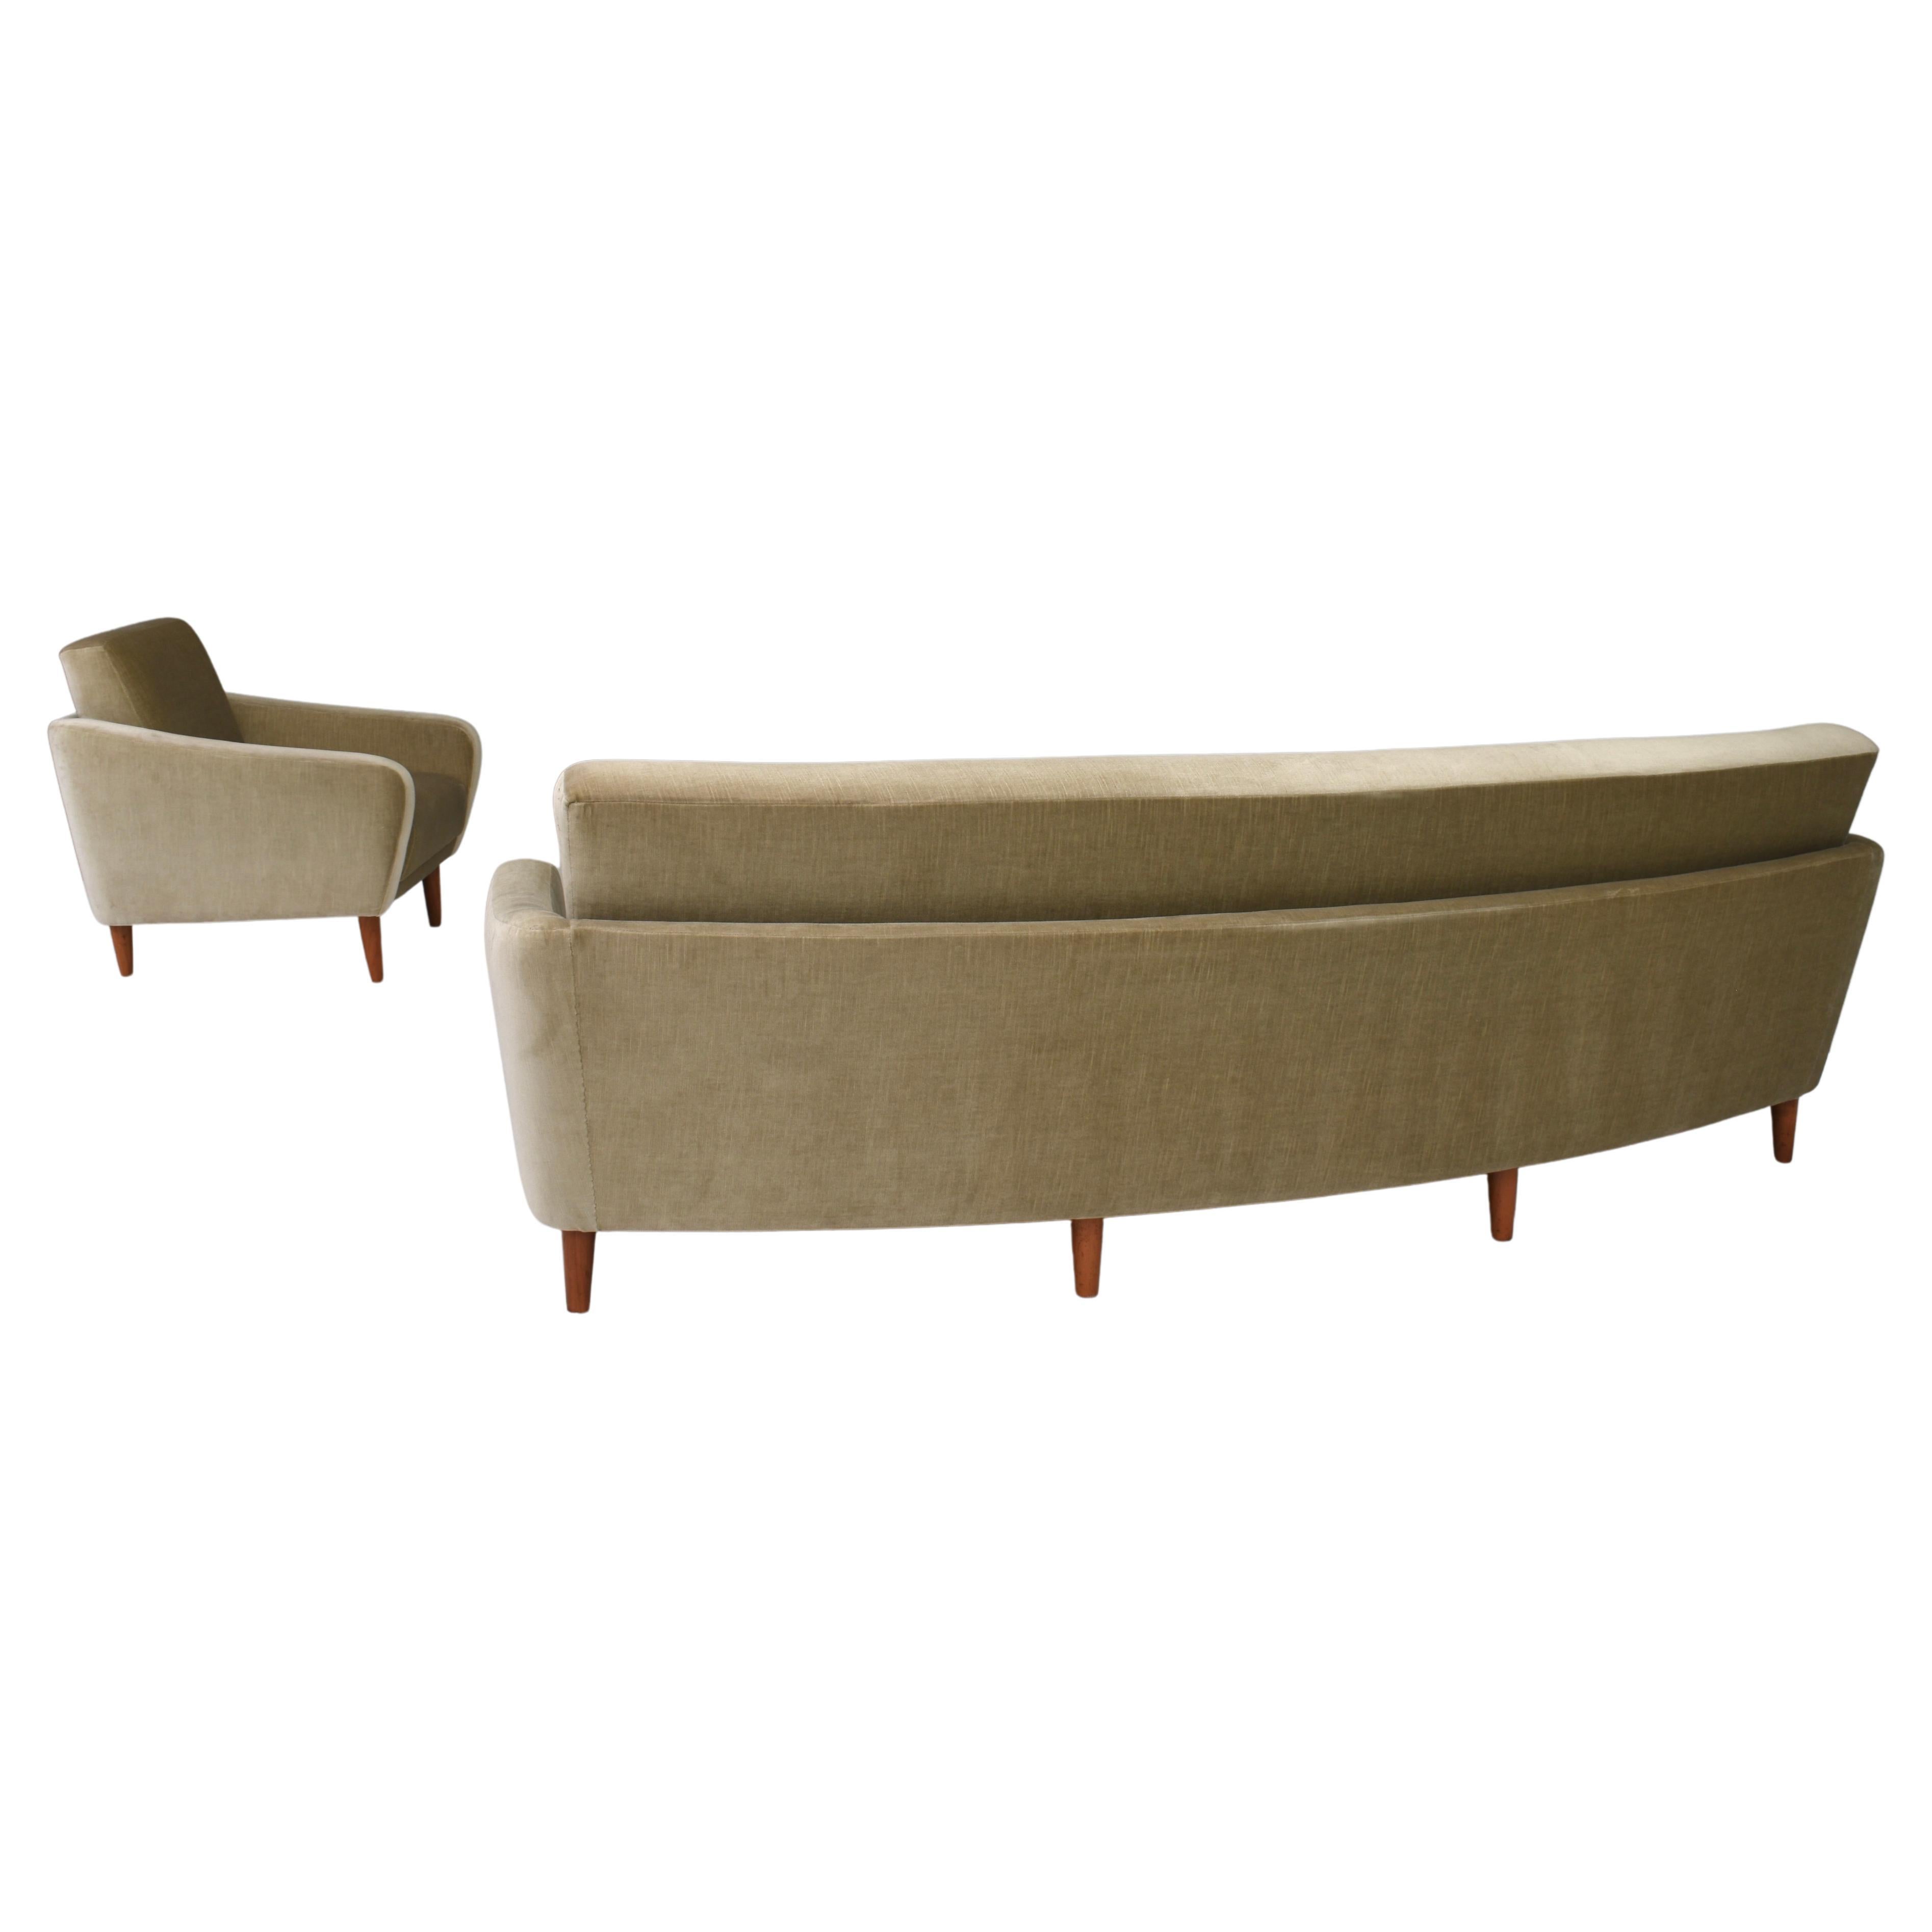 Curved Danish sofa and arm lounge chair in original Mohair velvet fabric and teak legs, circa 1950.
The Mohair fabric is still original and in very good condition with minor signs of age and use. All the upholstery is made of the same olive green